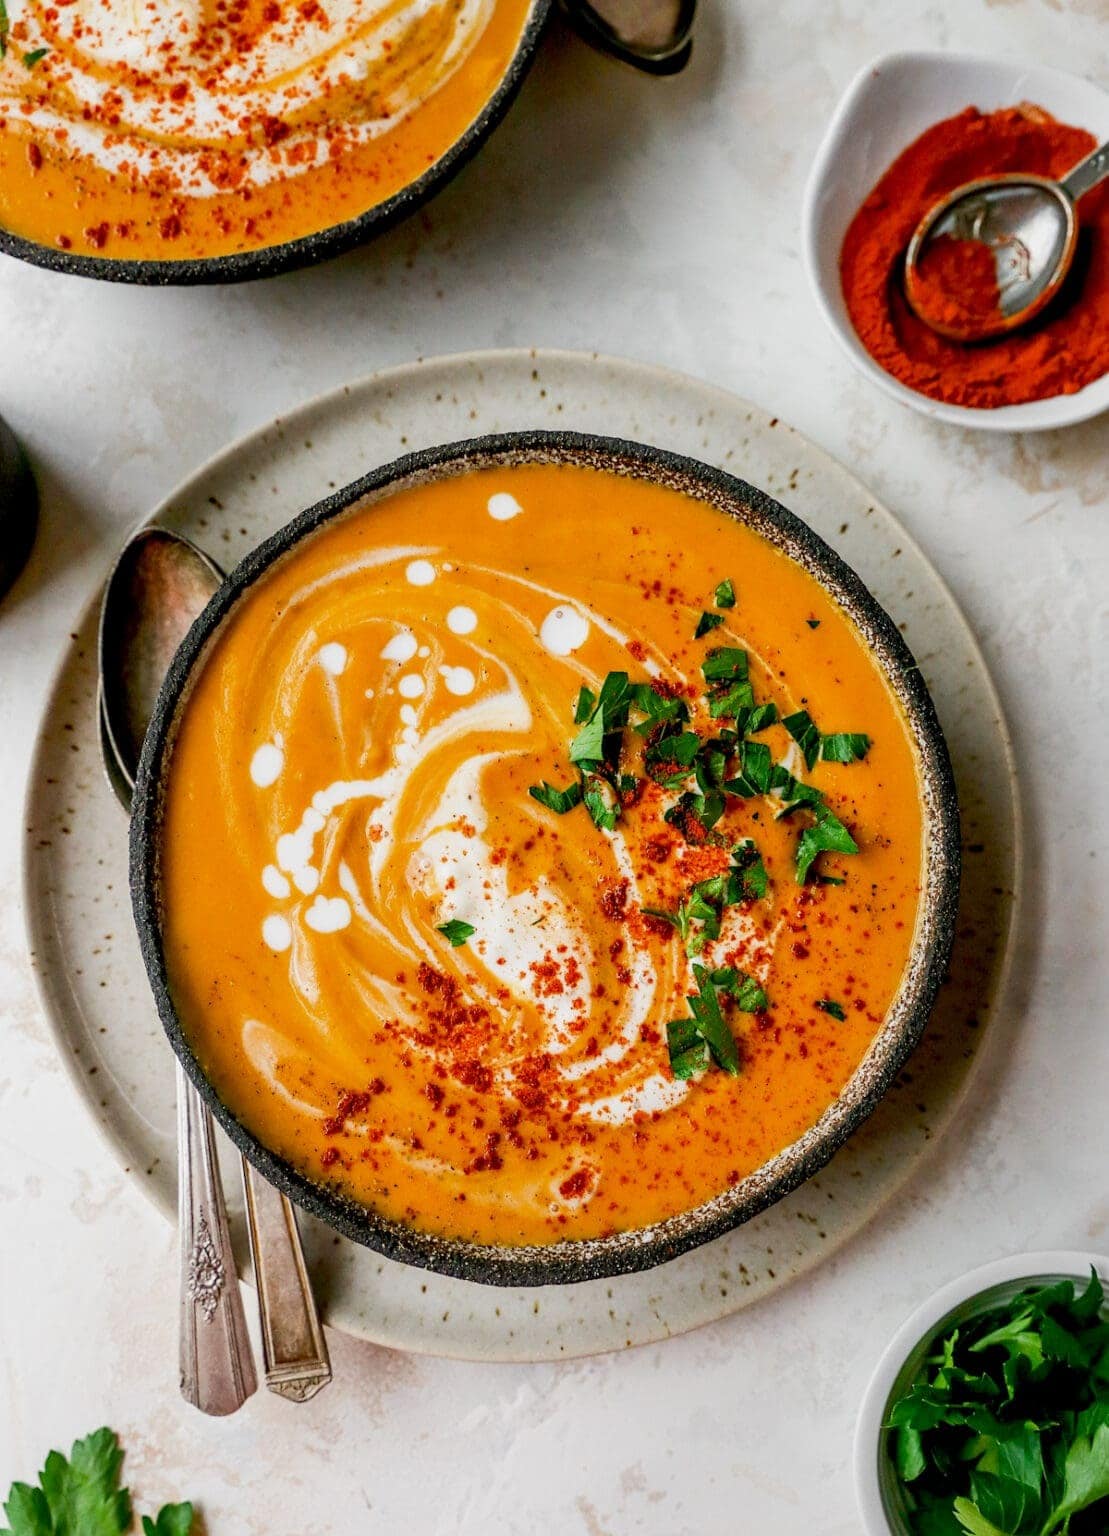 Bowls of homemade Sweet Potato Soup garnished with paprika powder and cilantro